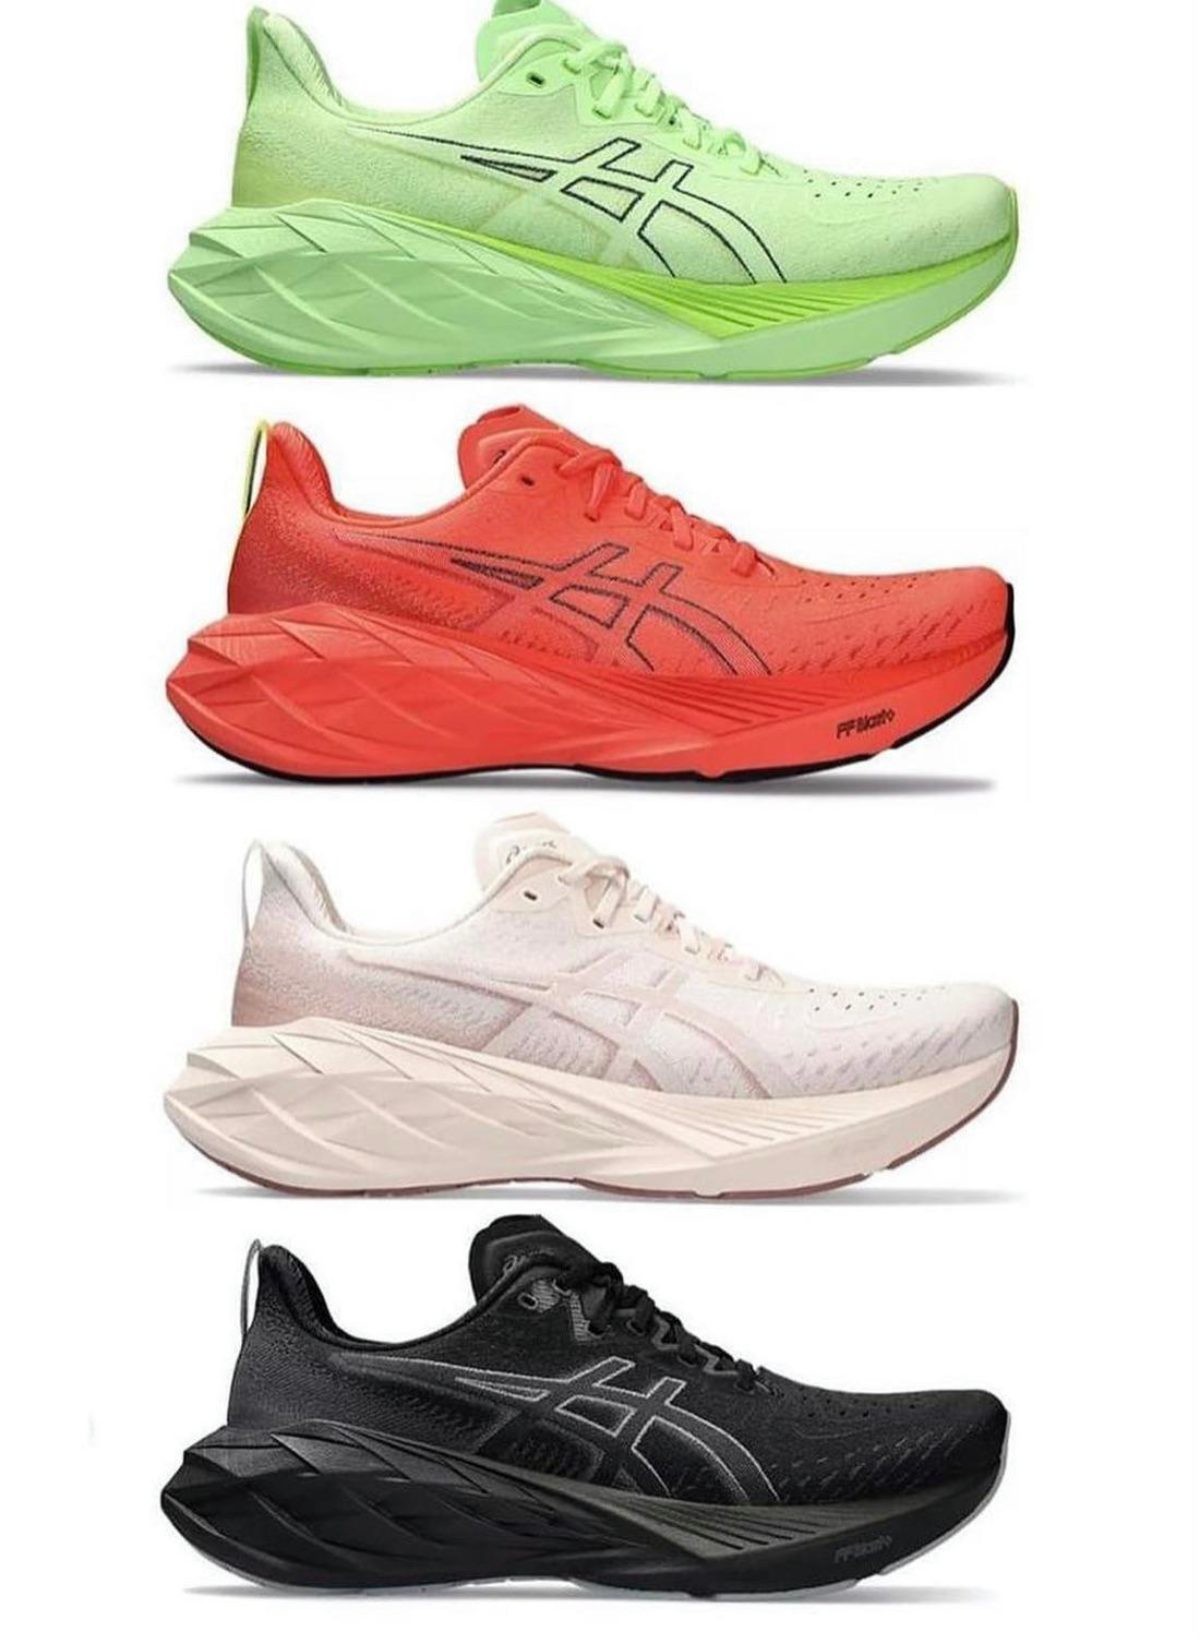 Everything we know about the asics novablast 4